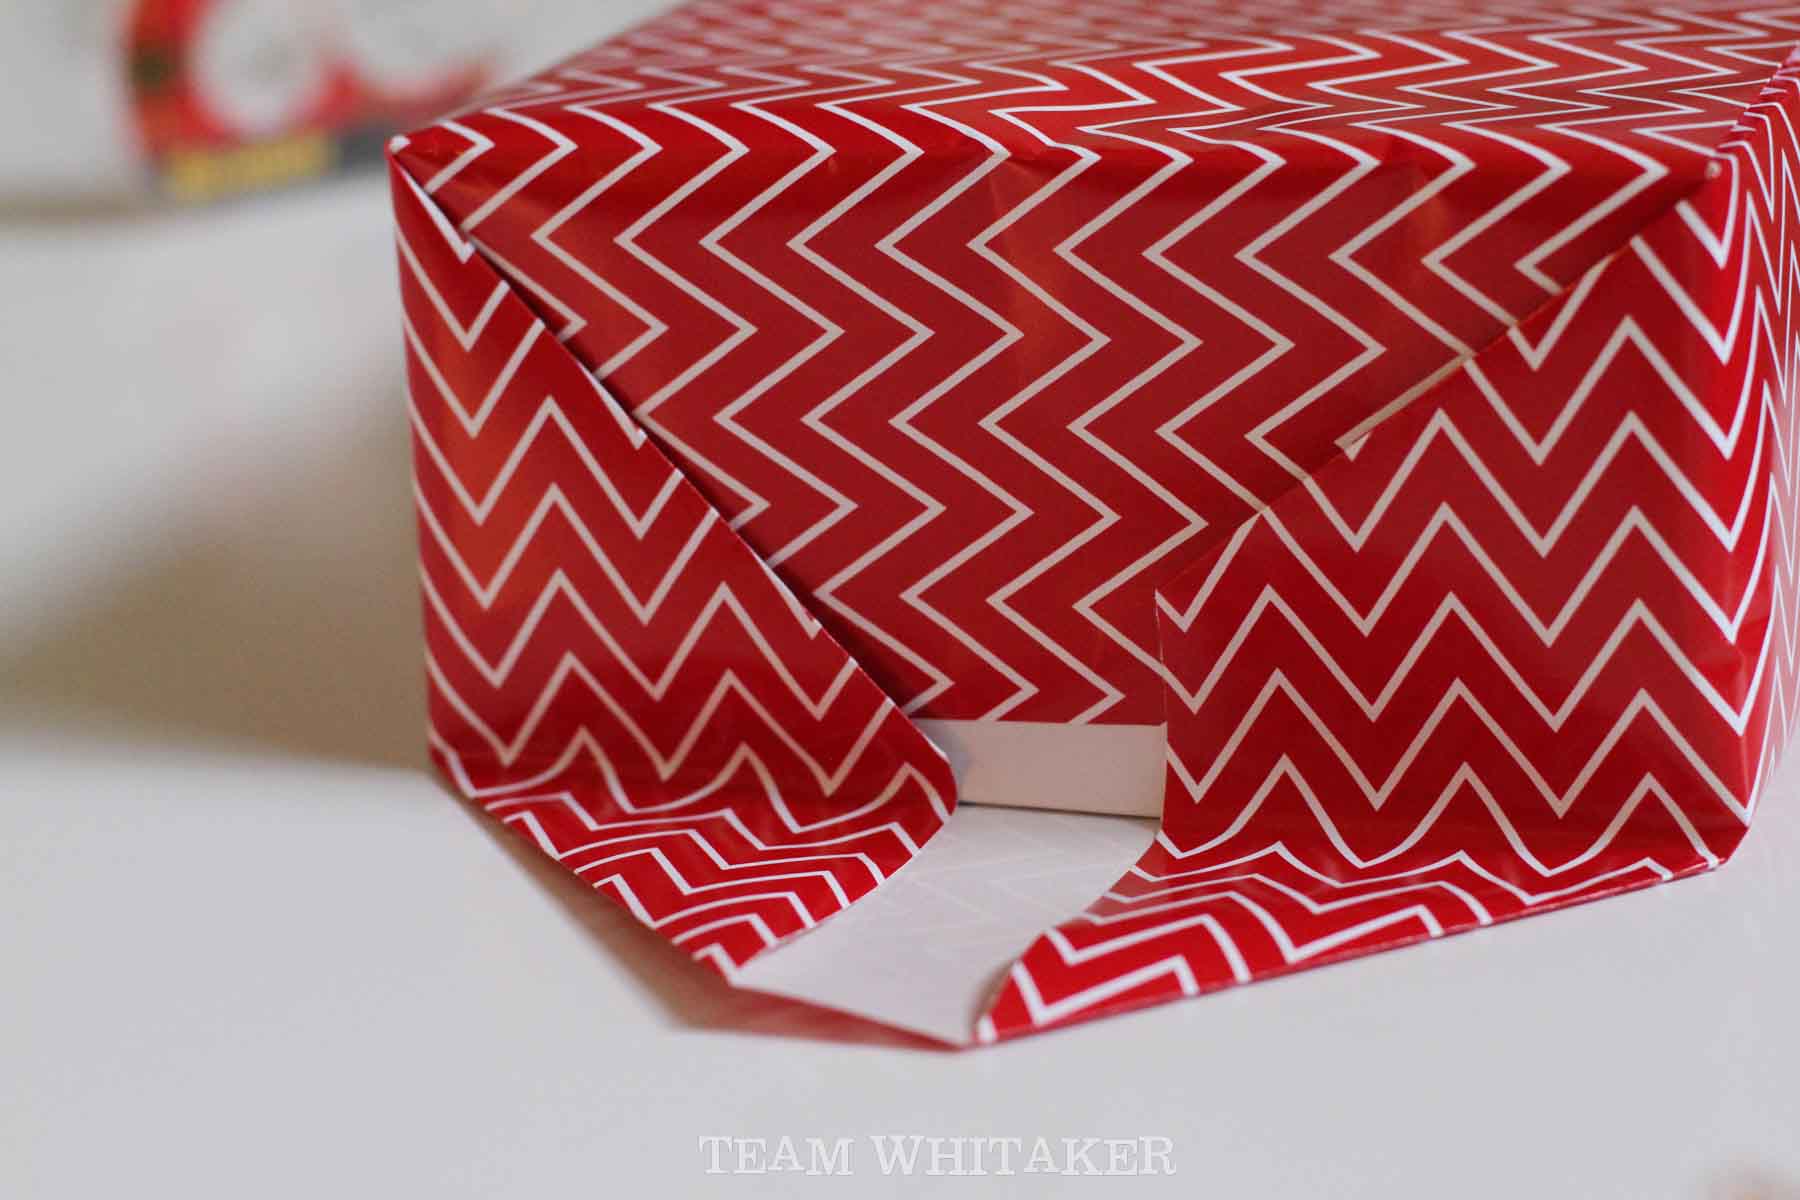 Love to wrap presents for Christmas, birthdays or other celebrations? This easy pictorial step-by-step guide will make you look like a pro!